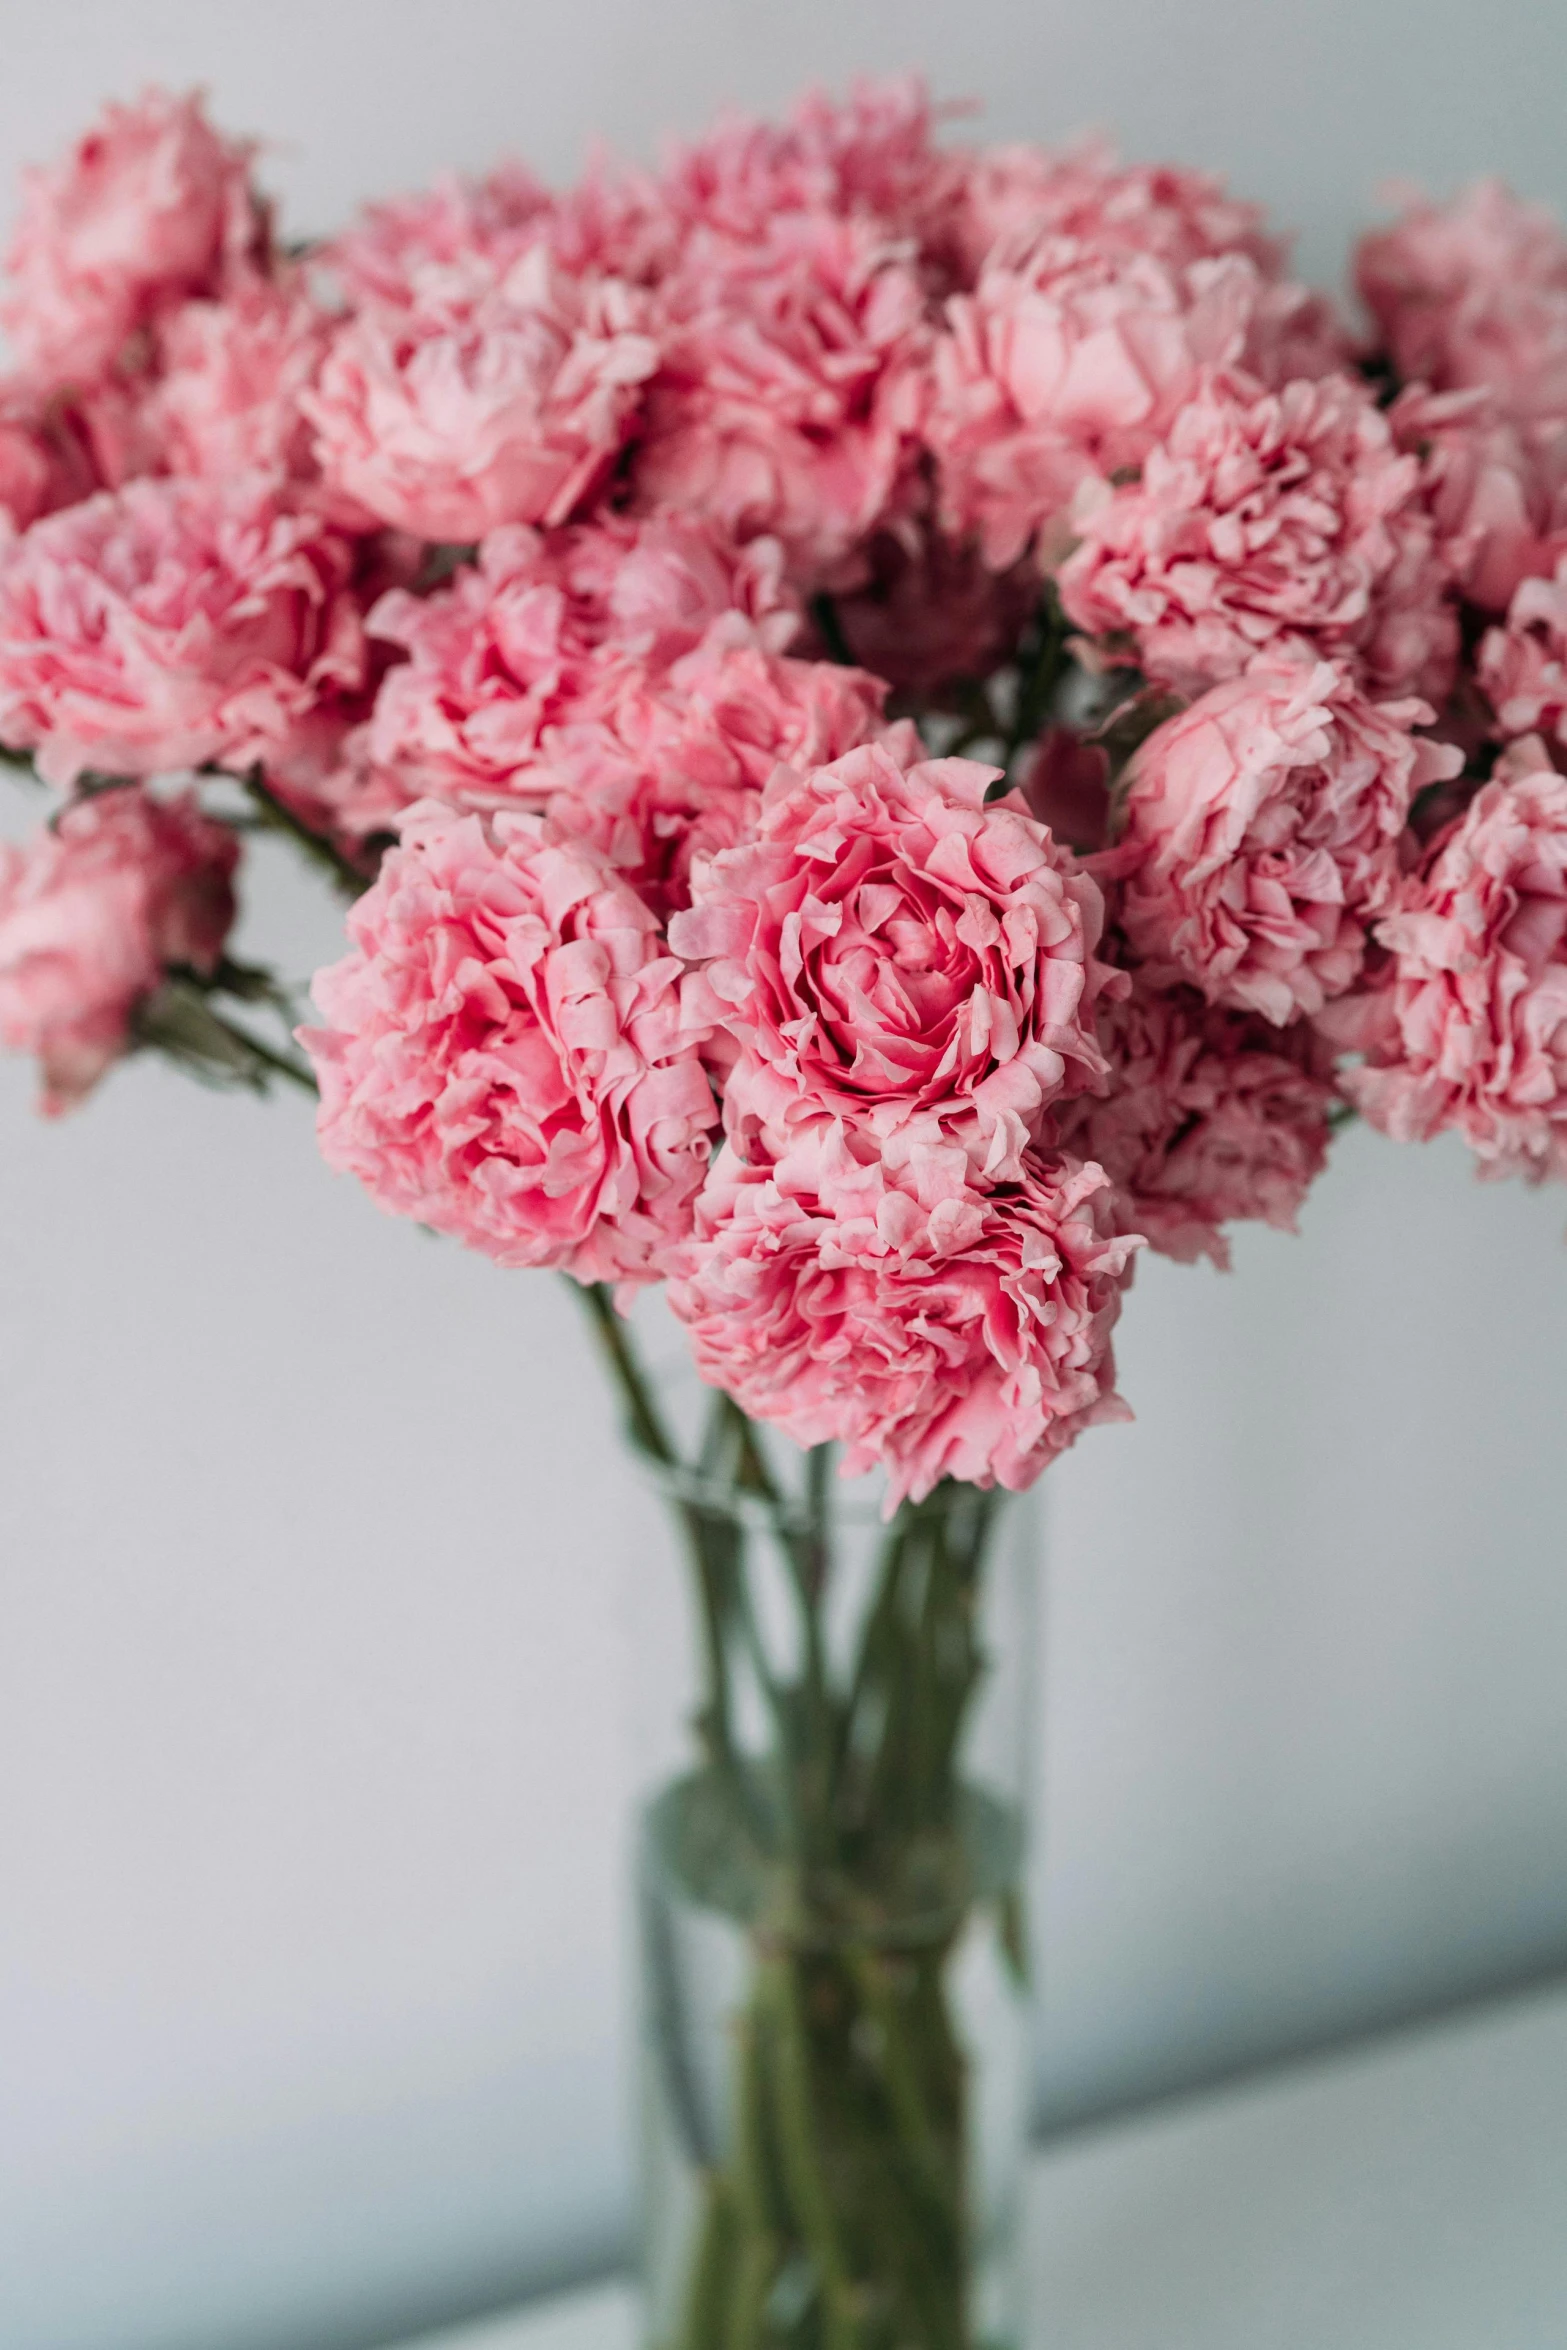 pink carnations in a glass vase on the table